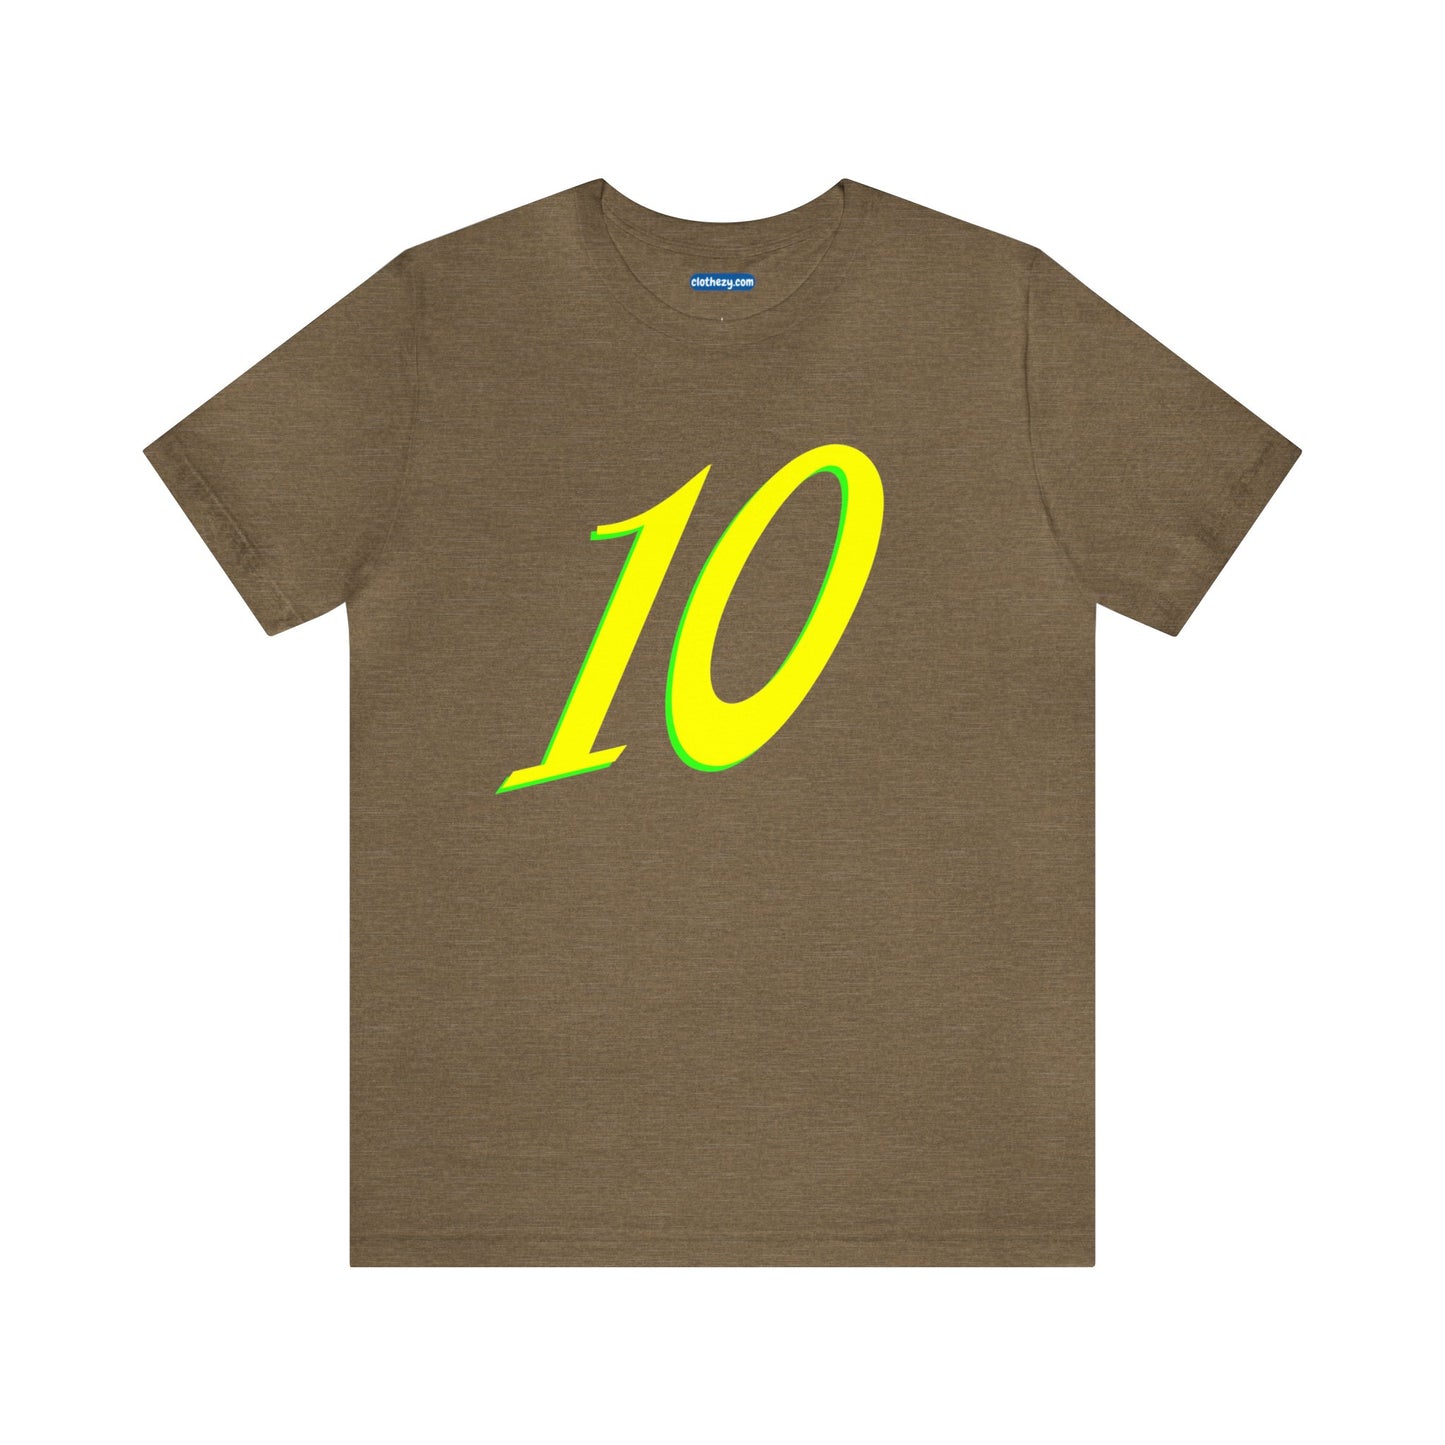 Number 10 Design - Soft Cotton Tee for birthdays and celebrations, Gift for friends and family, Multiple Options by clothezy.com in Olive Heather Size Small - Buy Now